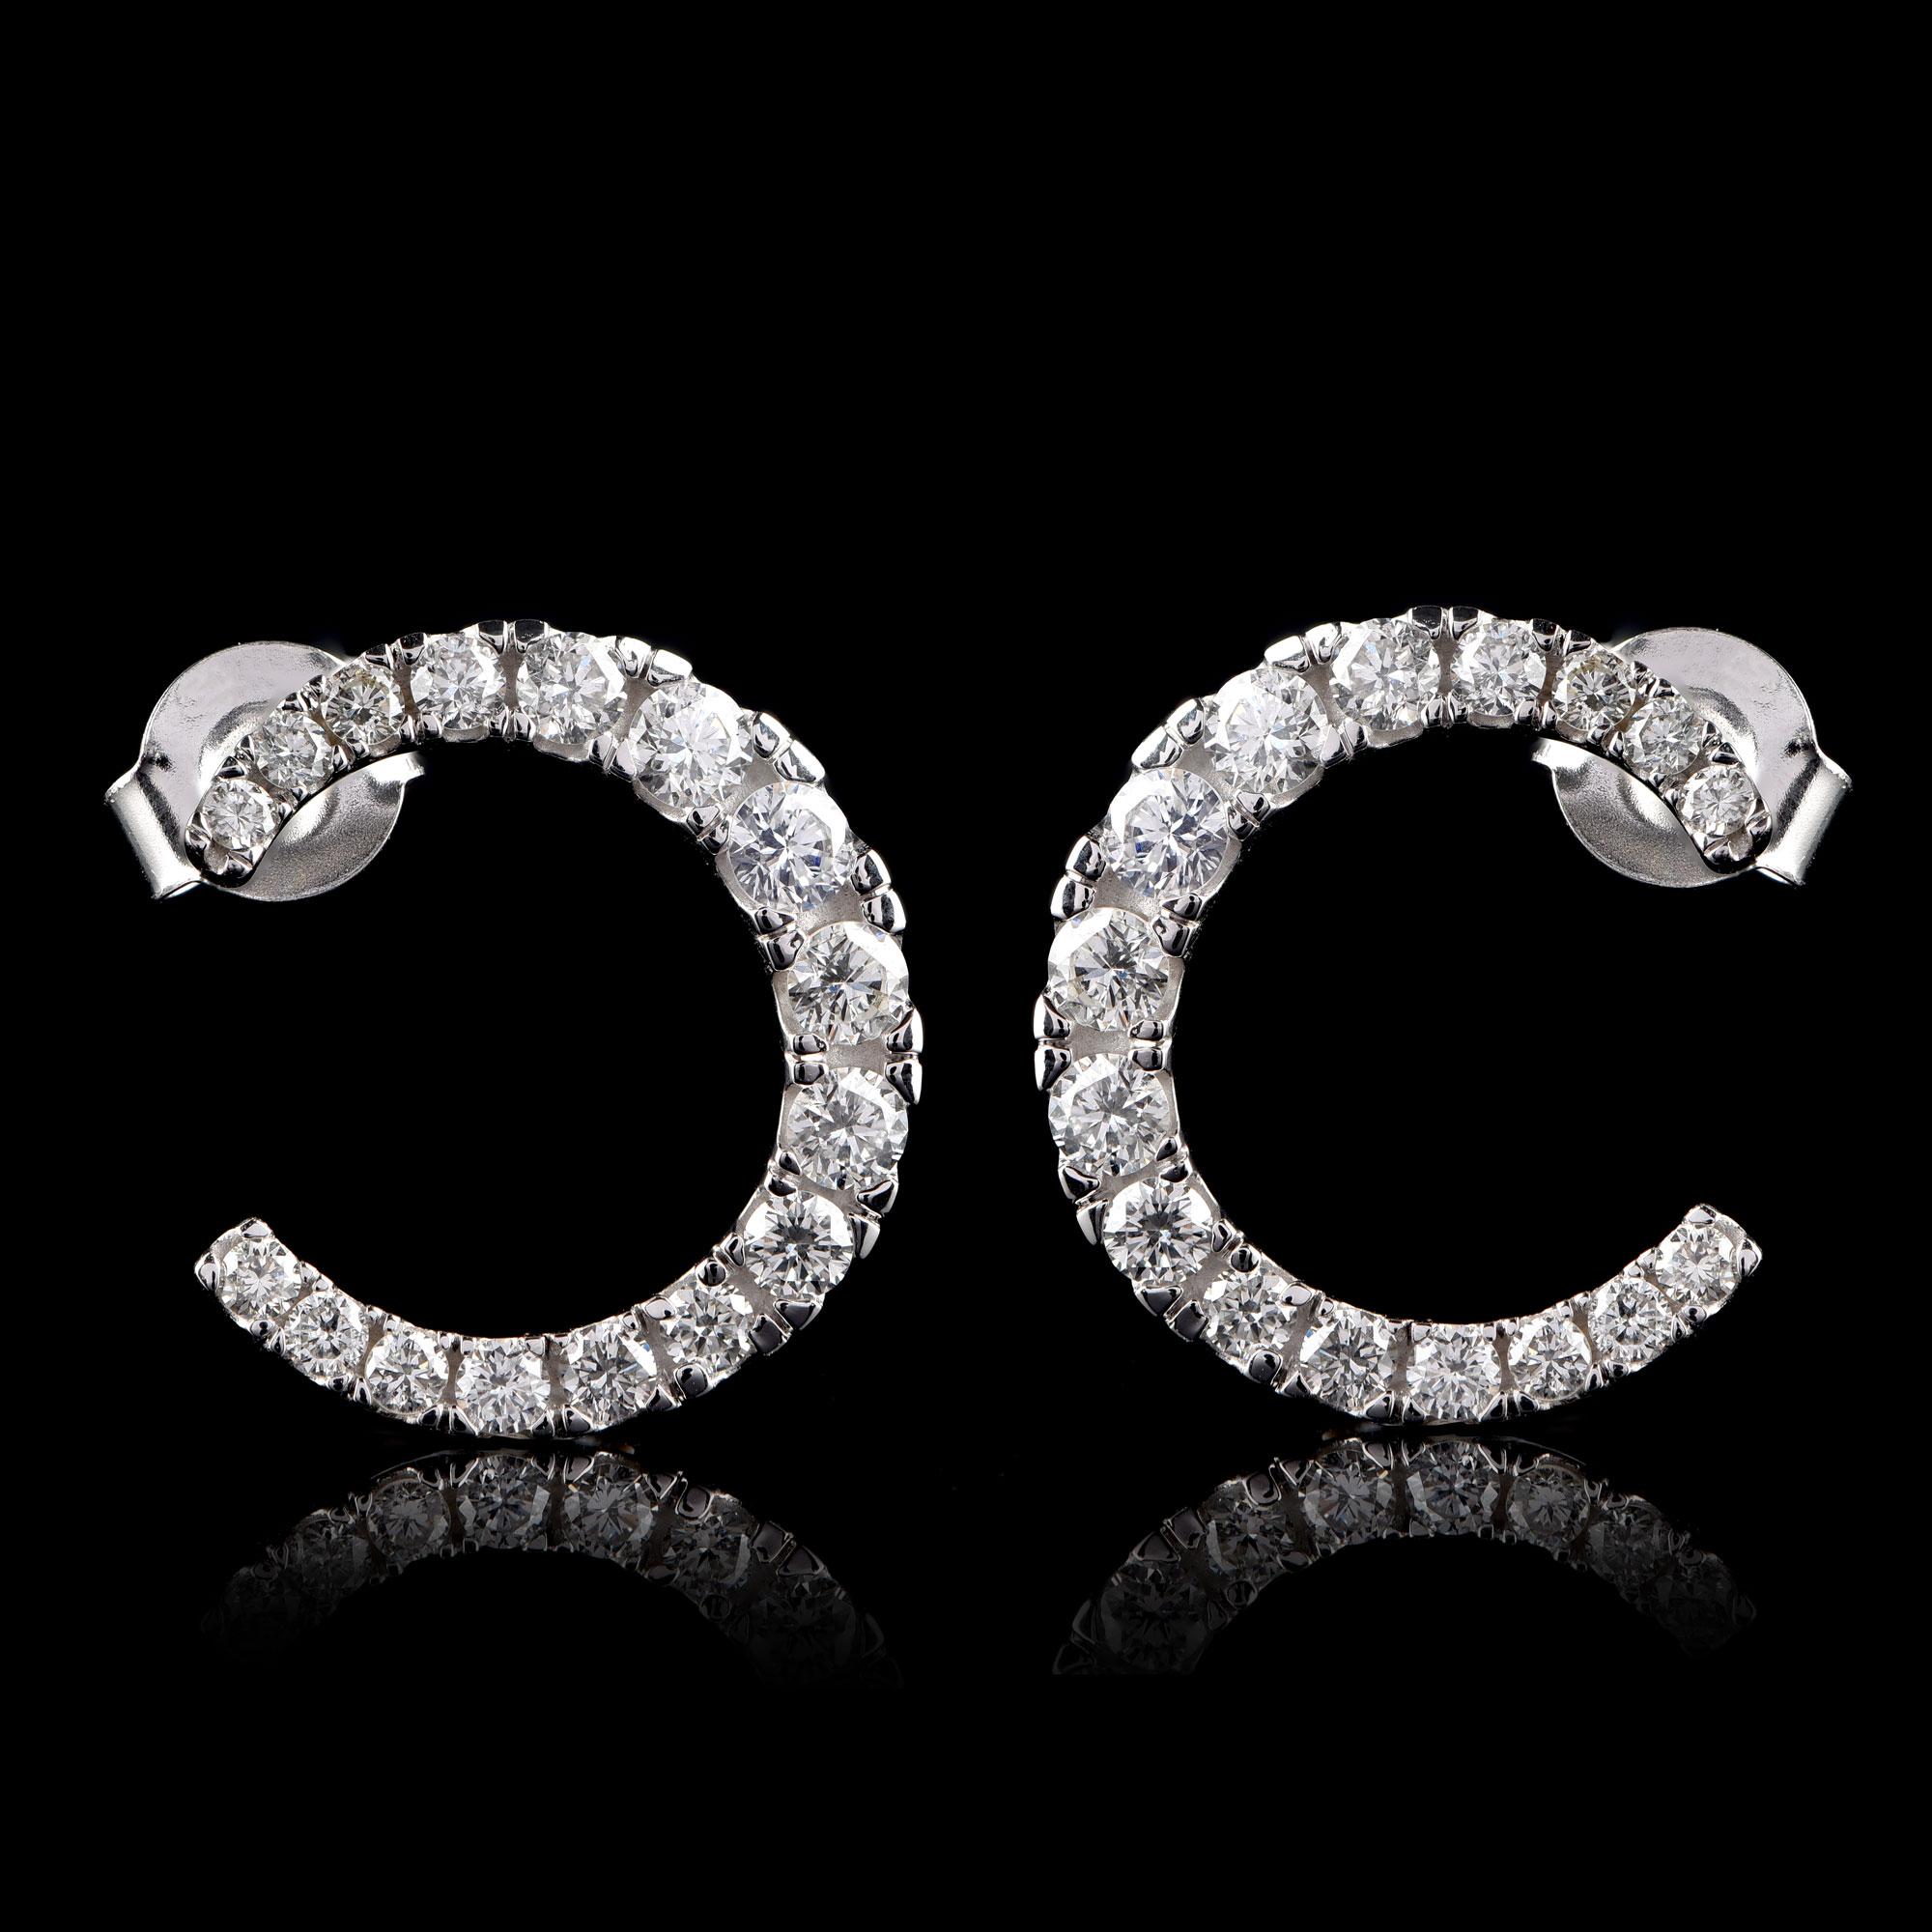 These alluring earrings shine brightly with 32 brilliant-cut diamonds set in prong setting and crafted in 14kt white gold. The diamonds are graded HI Color, I1 Clarity.